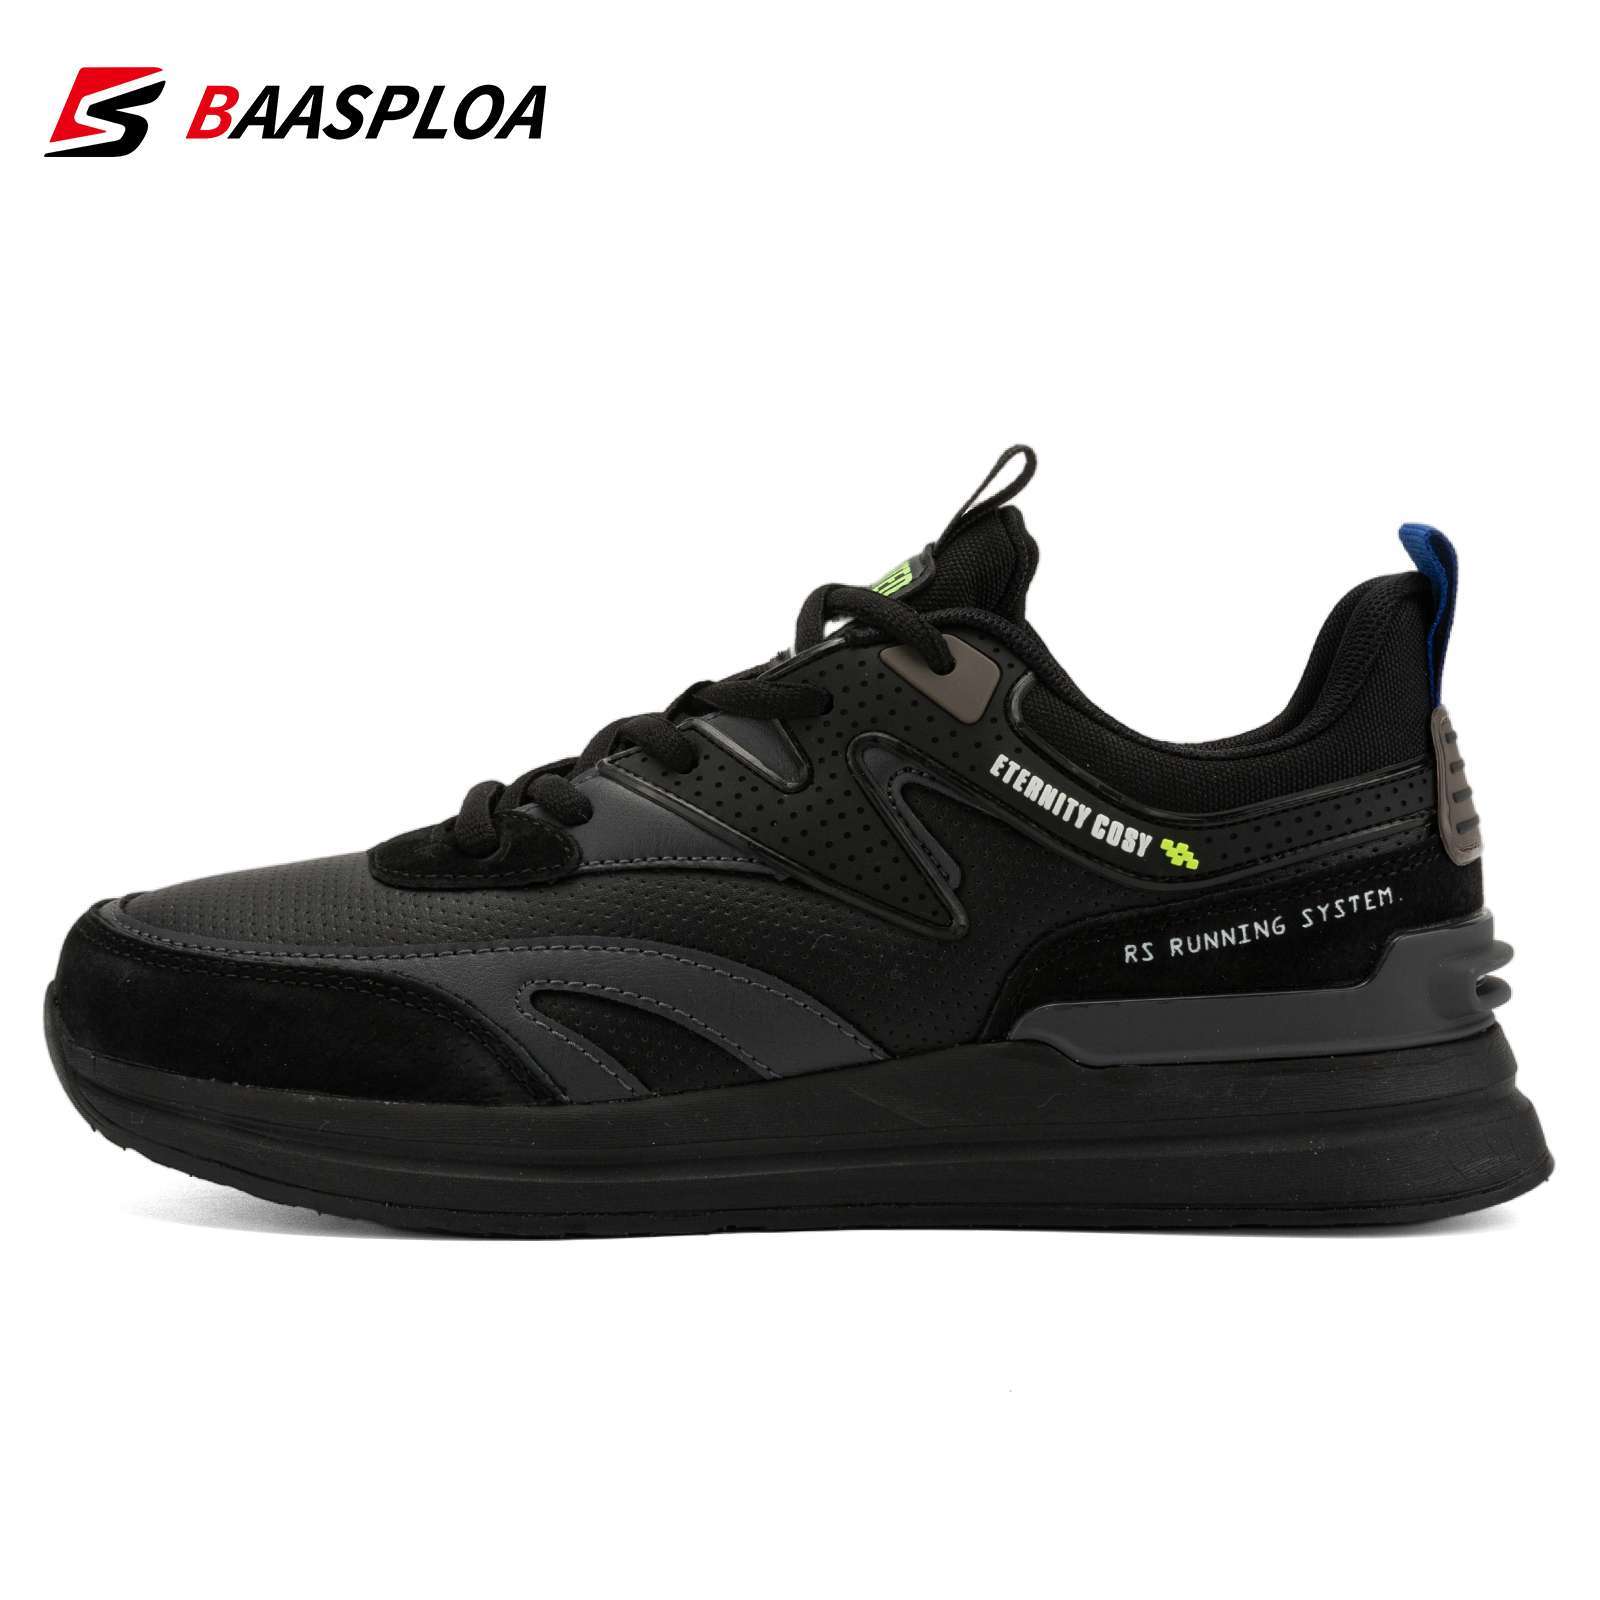 Baasploa New Men Leather Sneakers Lightweight Non slip Walking Shoes Fashion Male Casual Comfortable Lace Up 2